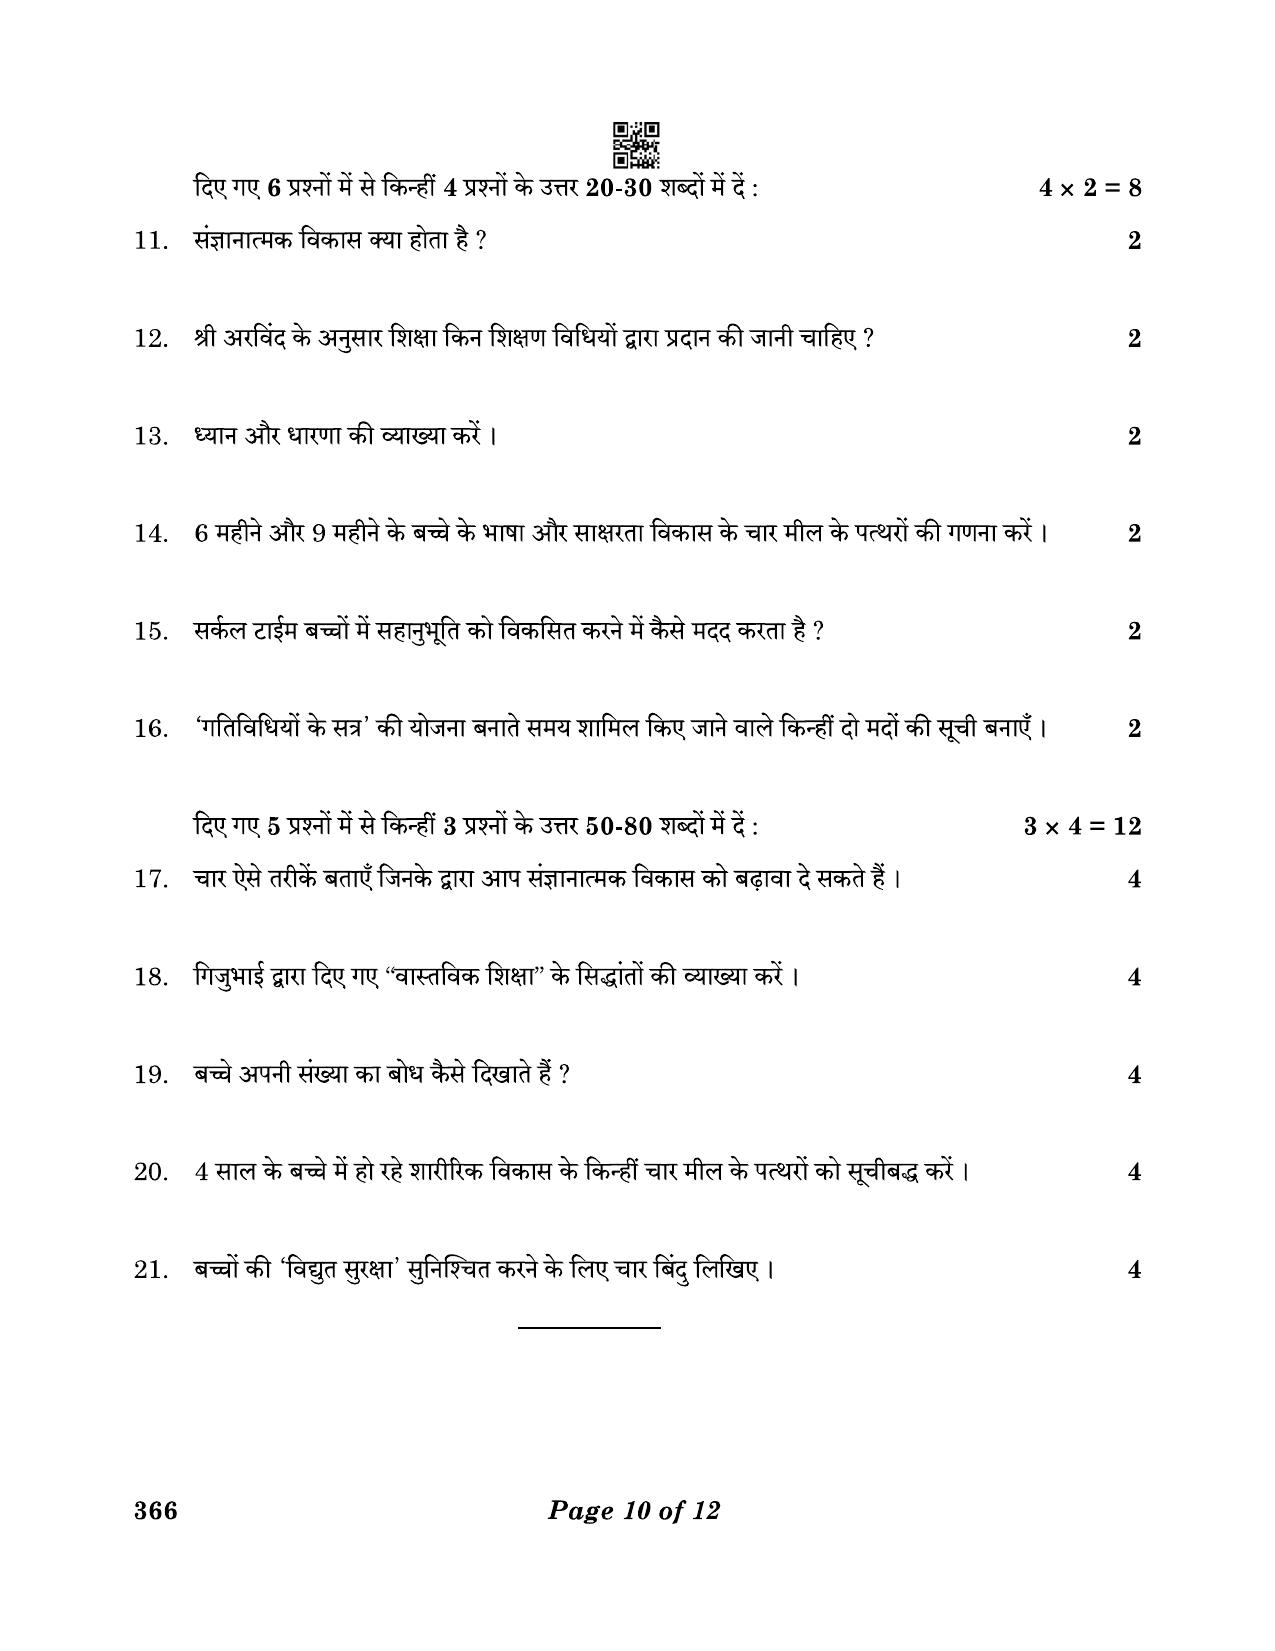 CBSE Class 12 366_Early Childhood Care & Education 2023 Question Paper - Page 10